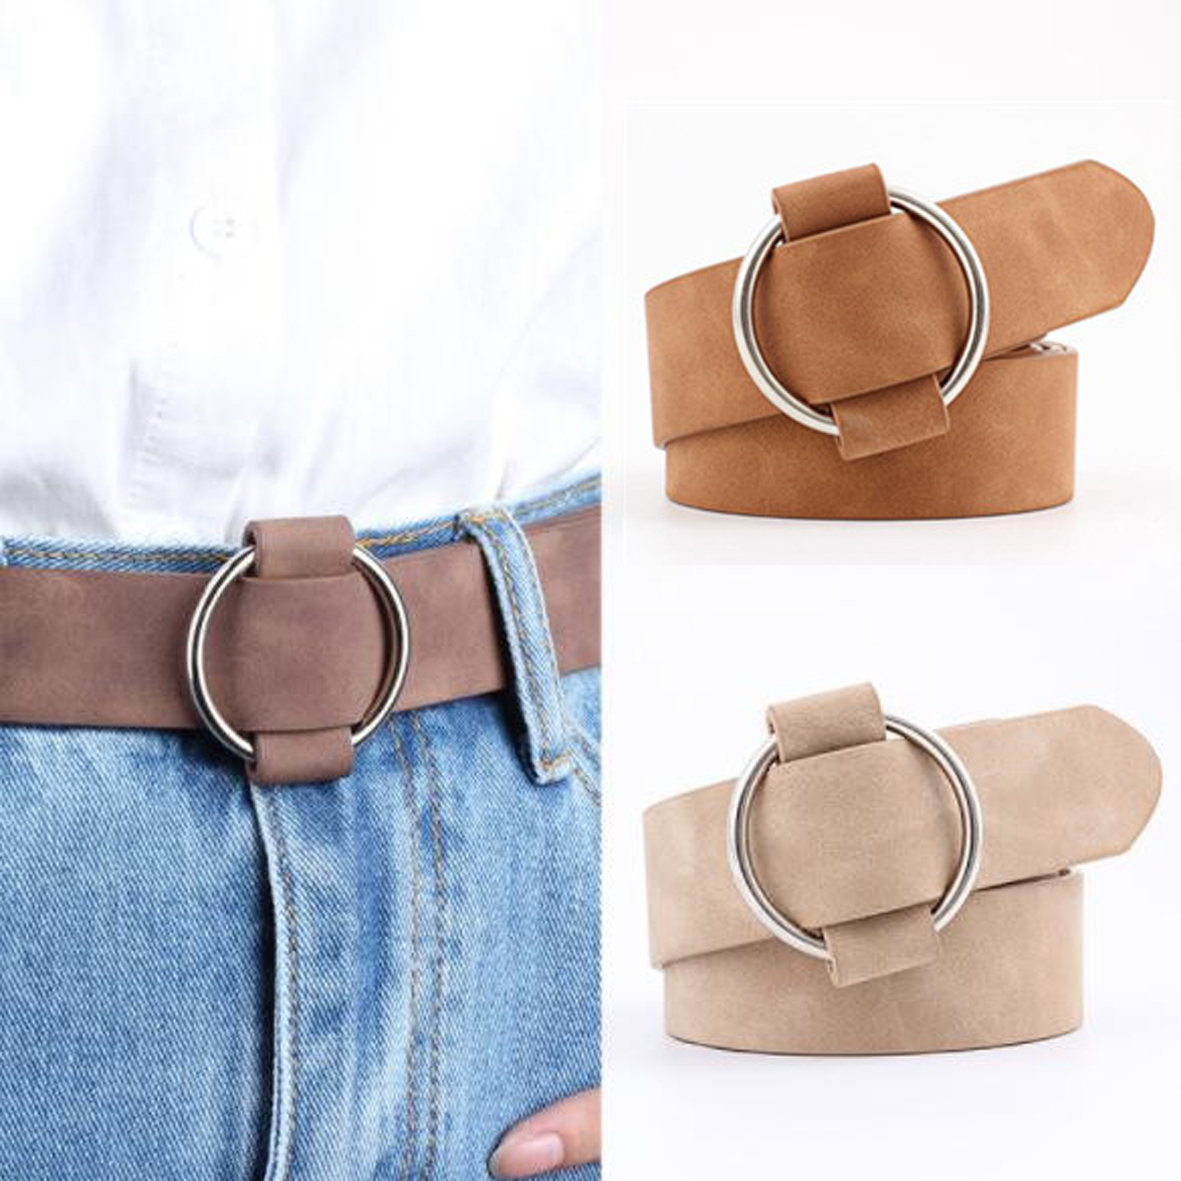 GL-ELY1217 Leather Belt for Lady